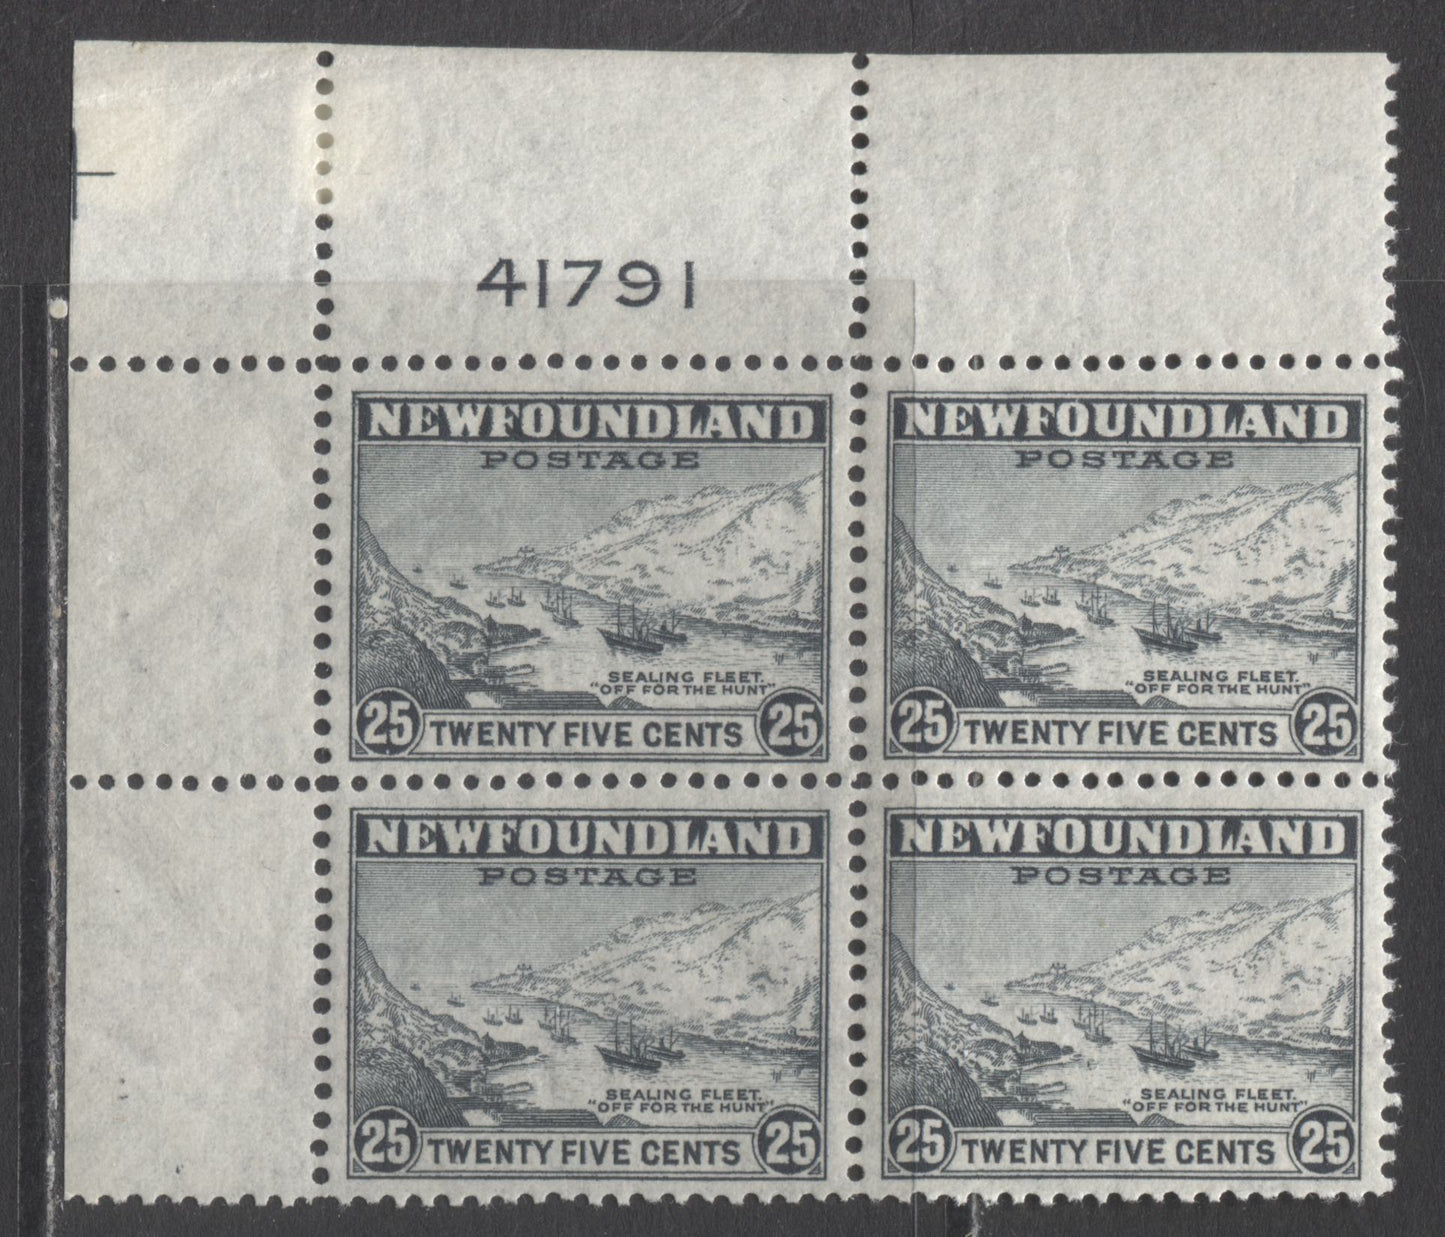 Lot 241 Newfoundland #265 25c Slate Sealing Fleet, 1941-1944 Resources Re-Issue, A VFNH UL Plate 41791 Block Of 4